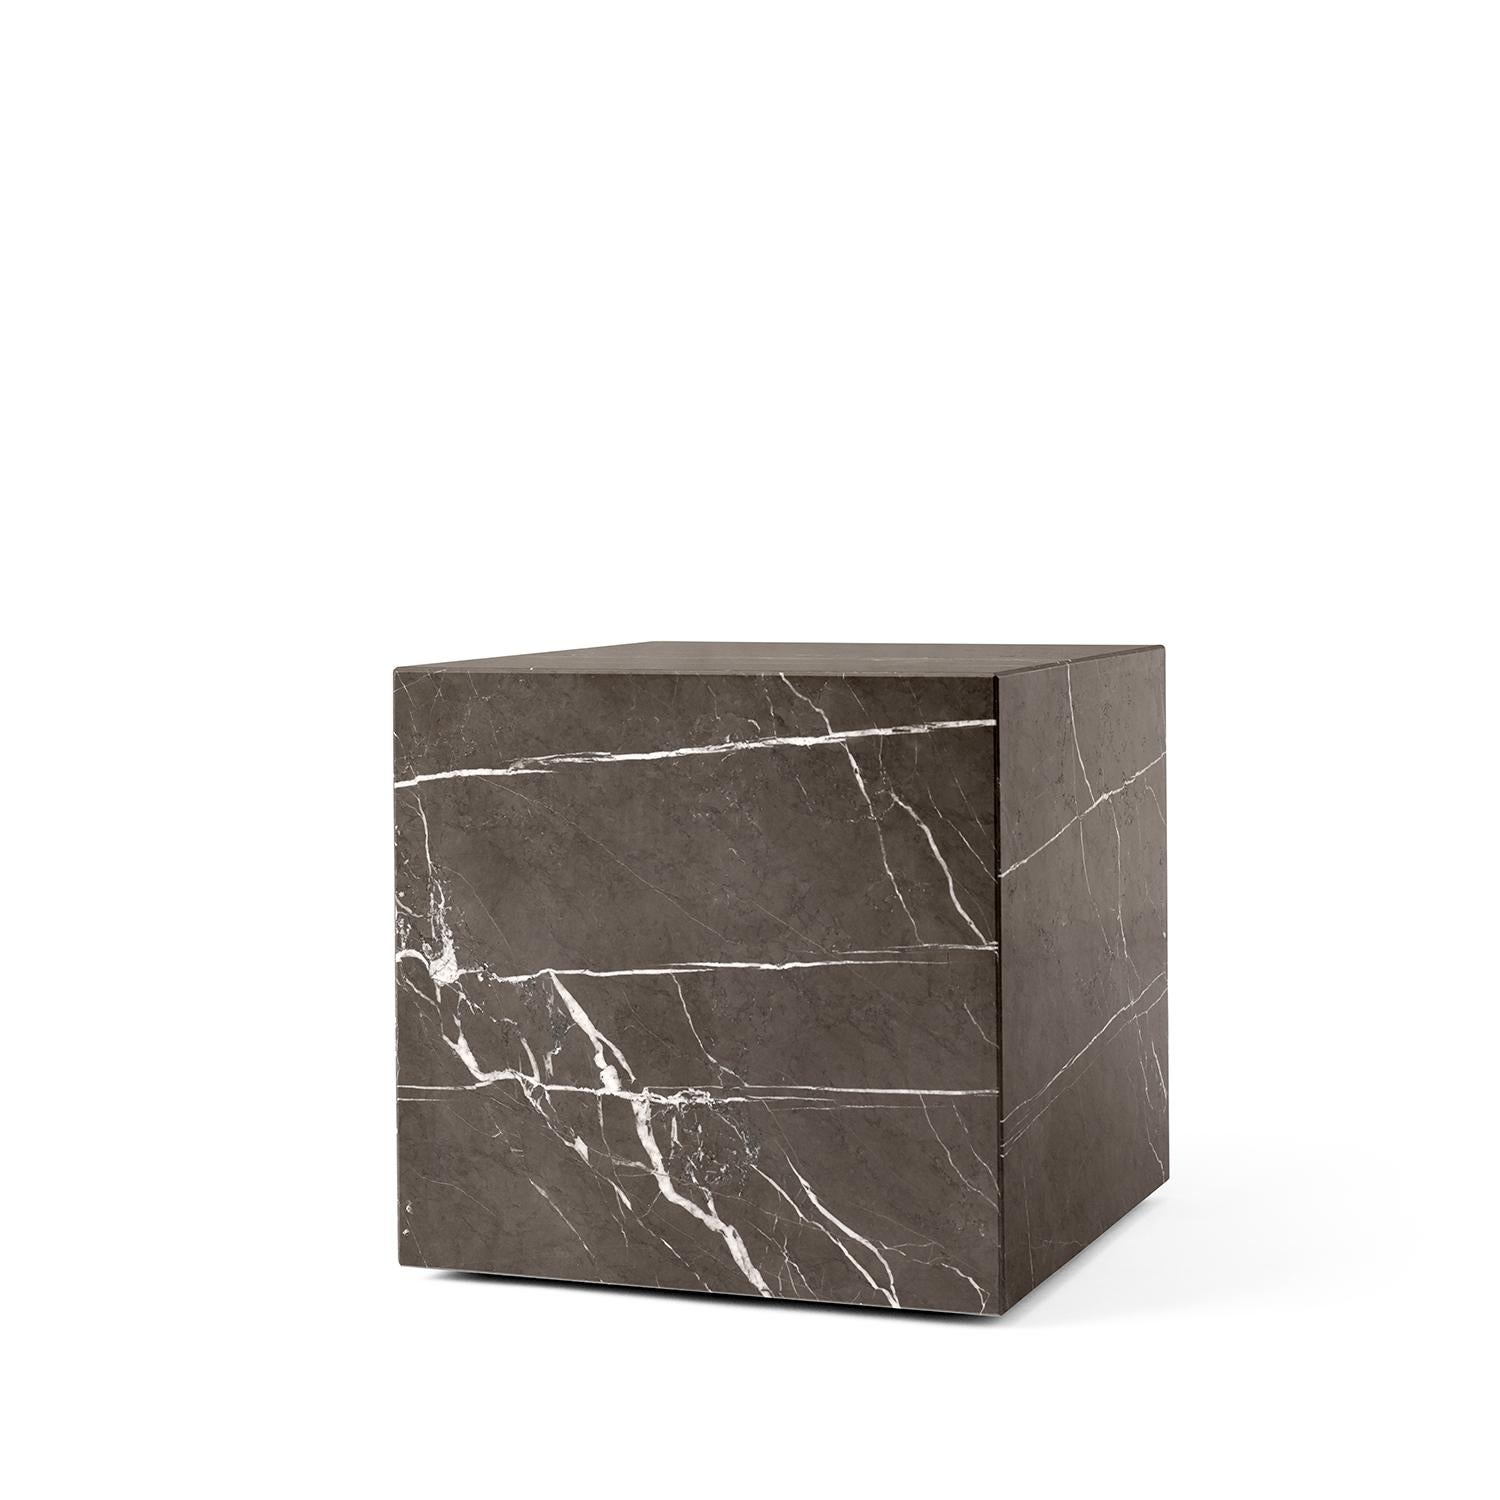 As versatile as it is timeless, the marble Plinth serves the dual purpose of being a beautiful, sculptural piece on its own and highlighting whatever objects rest upon it. The honed marble carries an air of sophistication and elegance to elevate any